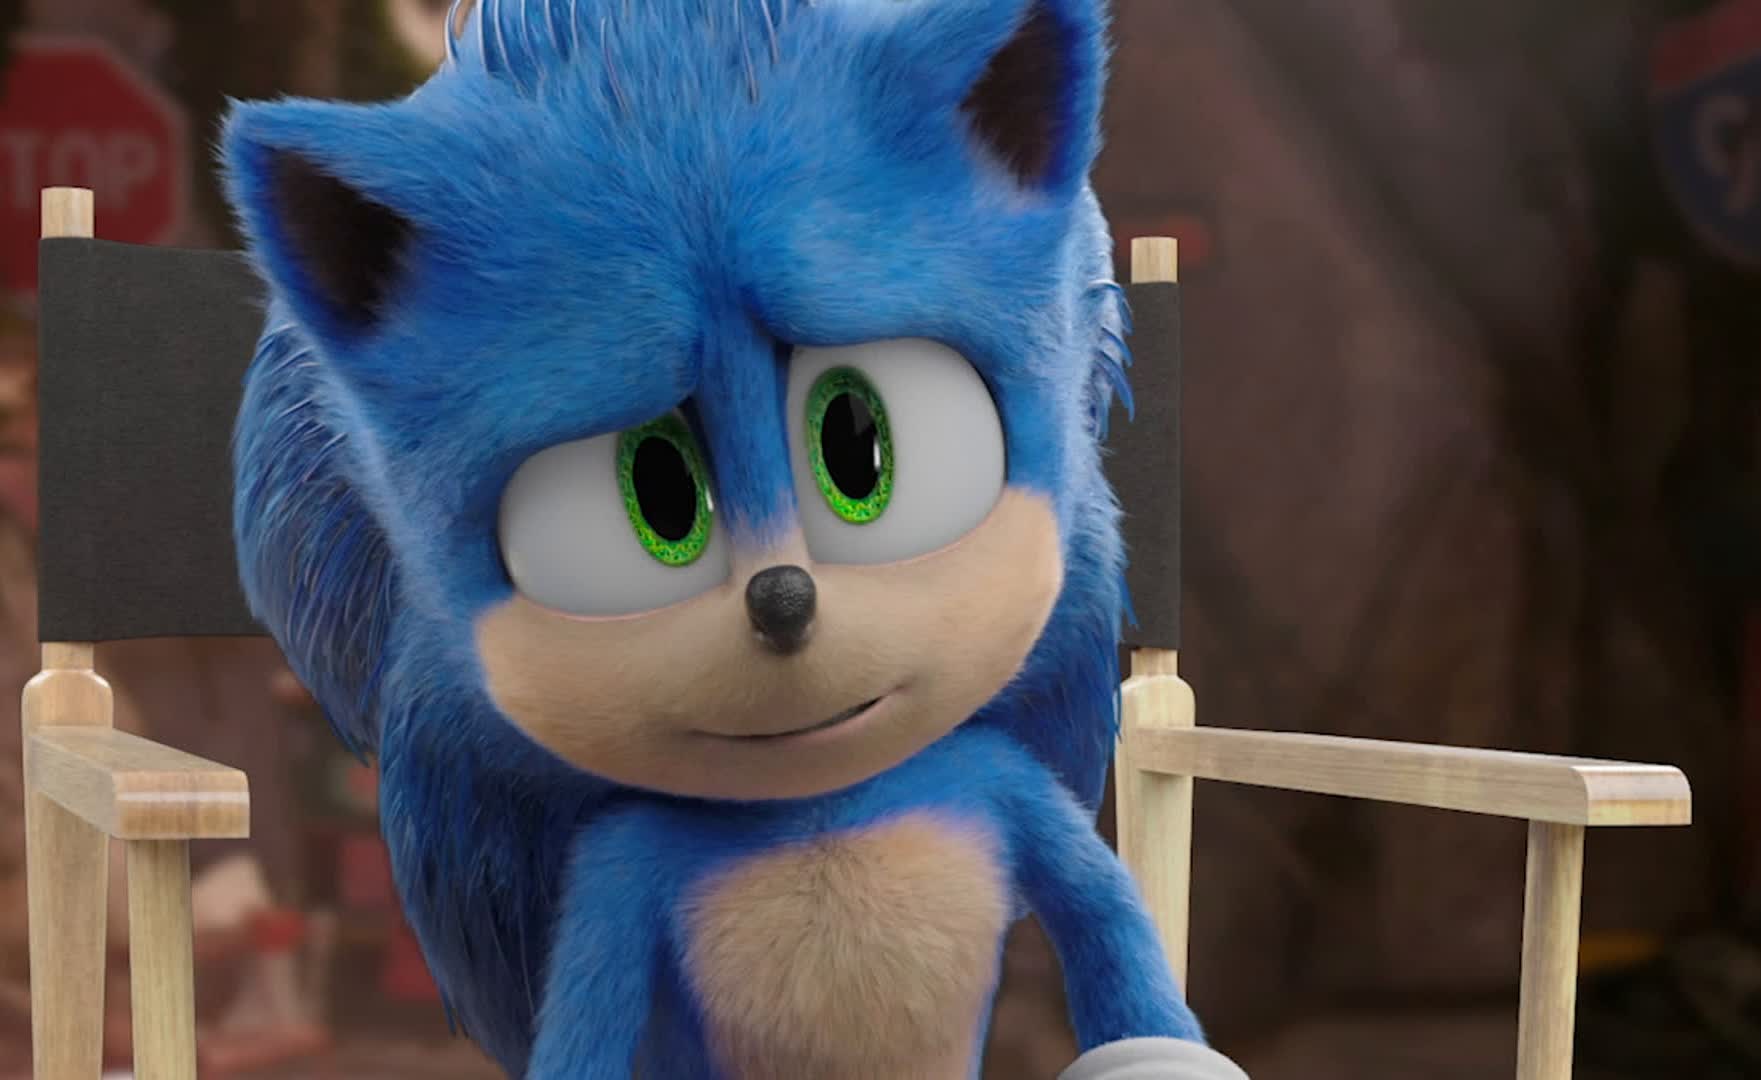 Paramount confirms a third Sonic movie and live-action TV series are in the works